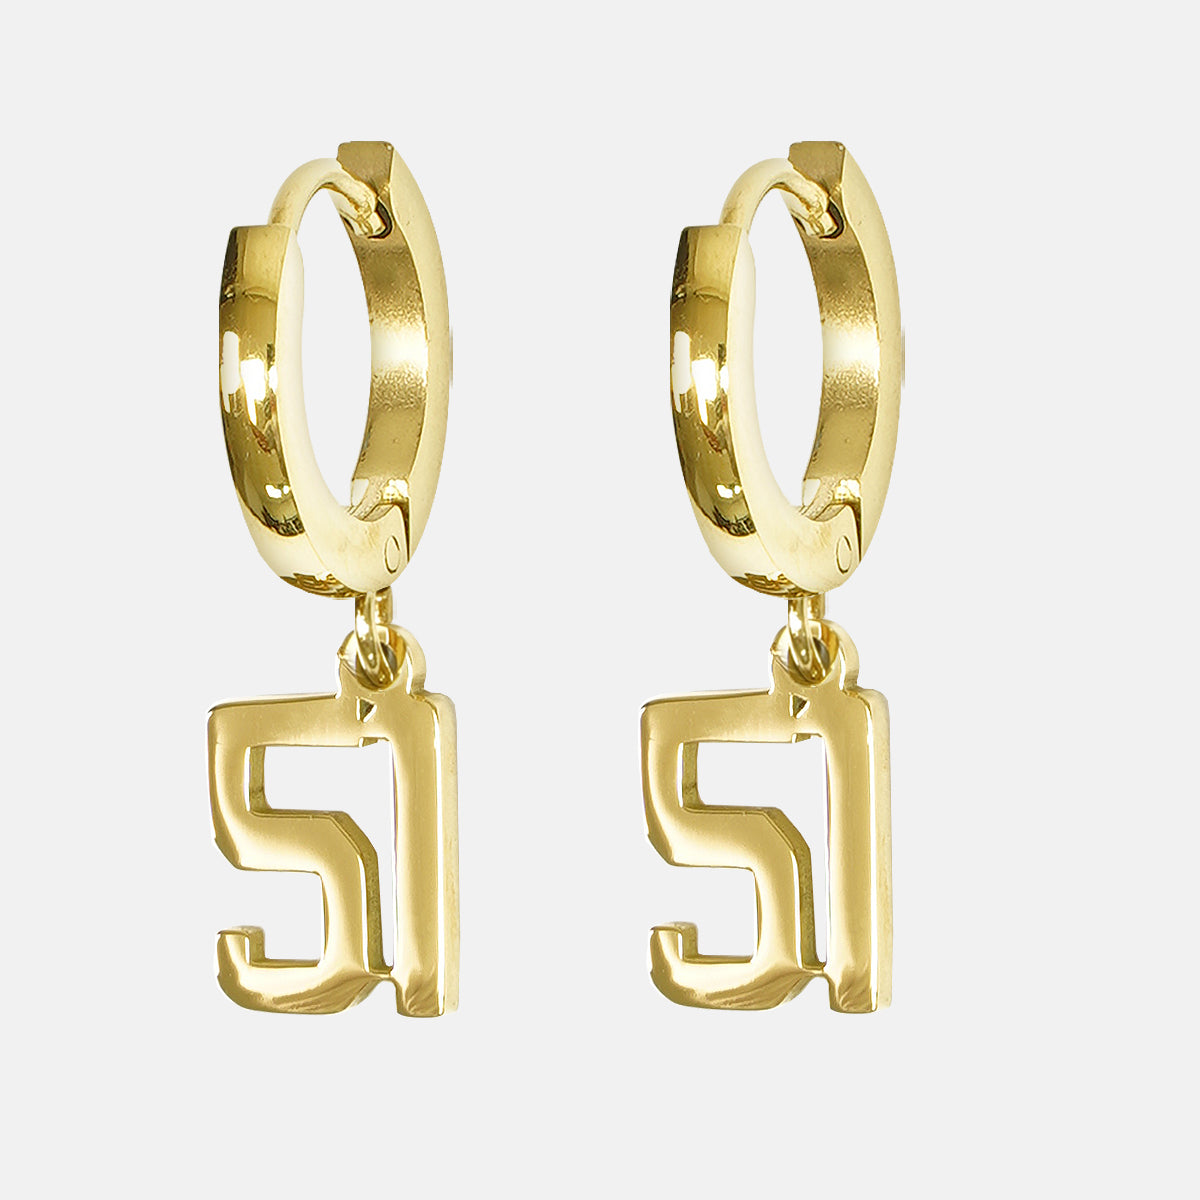 51 Number Earring - Gold Plated Stainless Steel